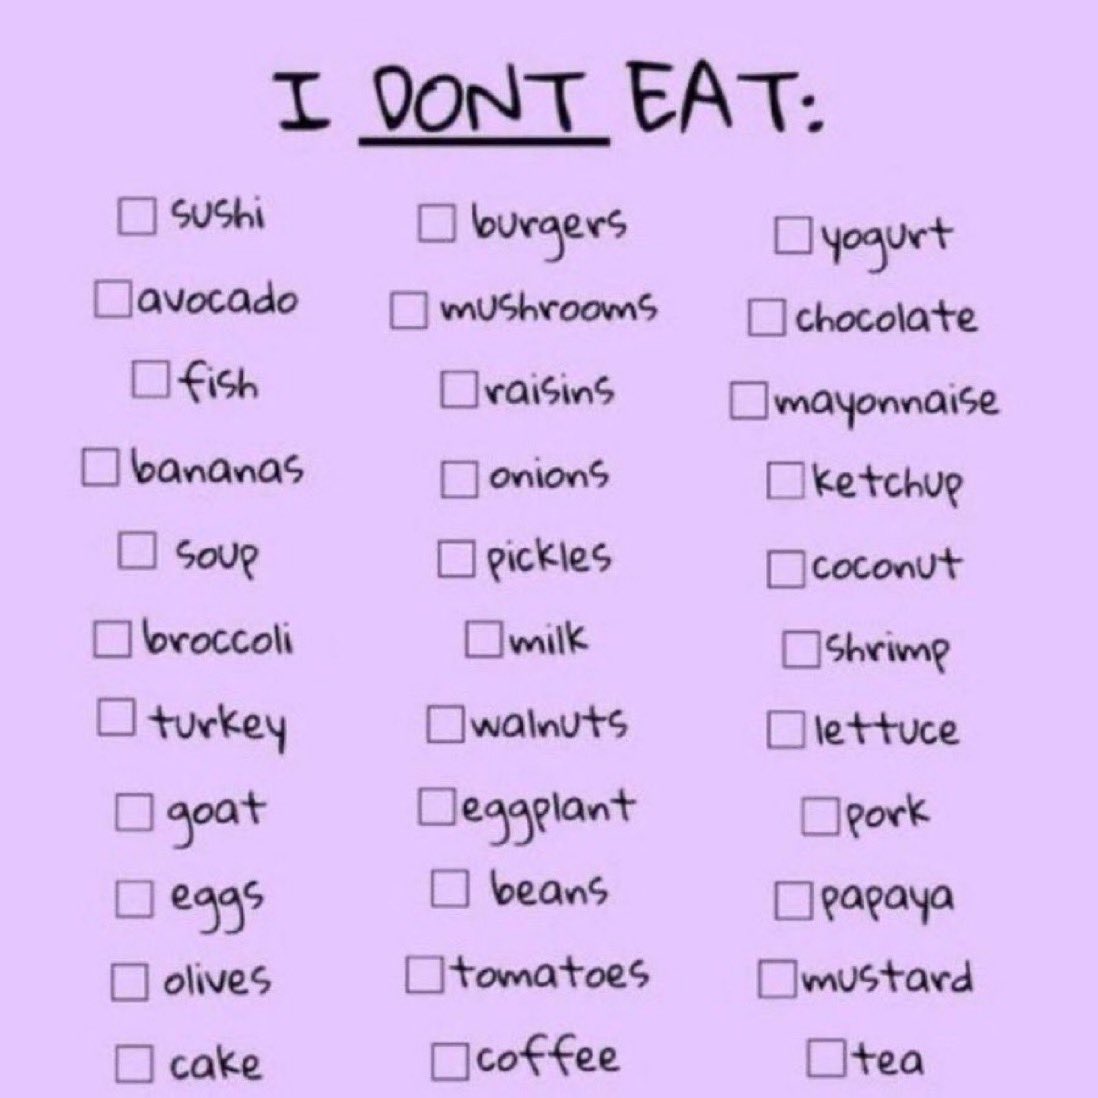 No judgement but I’m surprised by the amount of things people don’t eat.